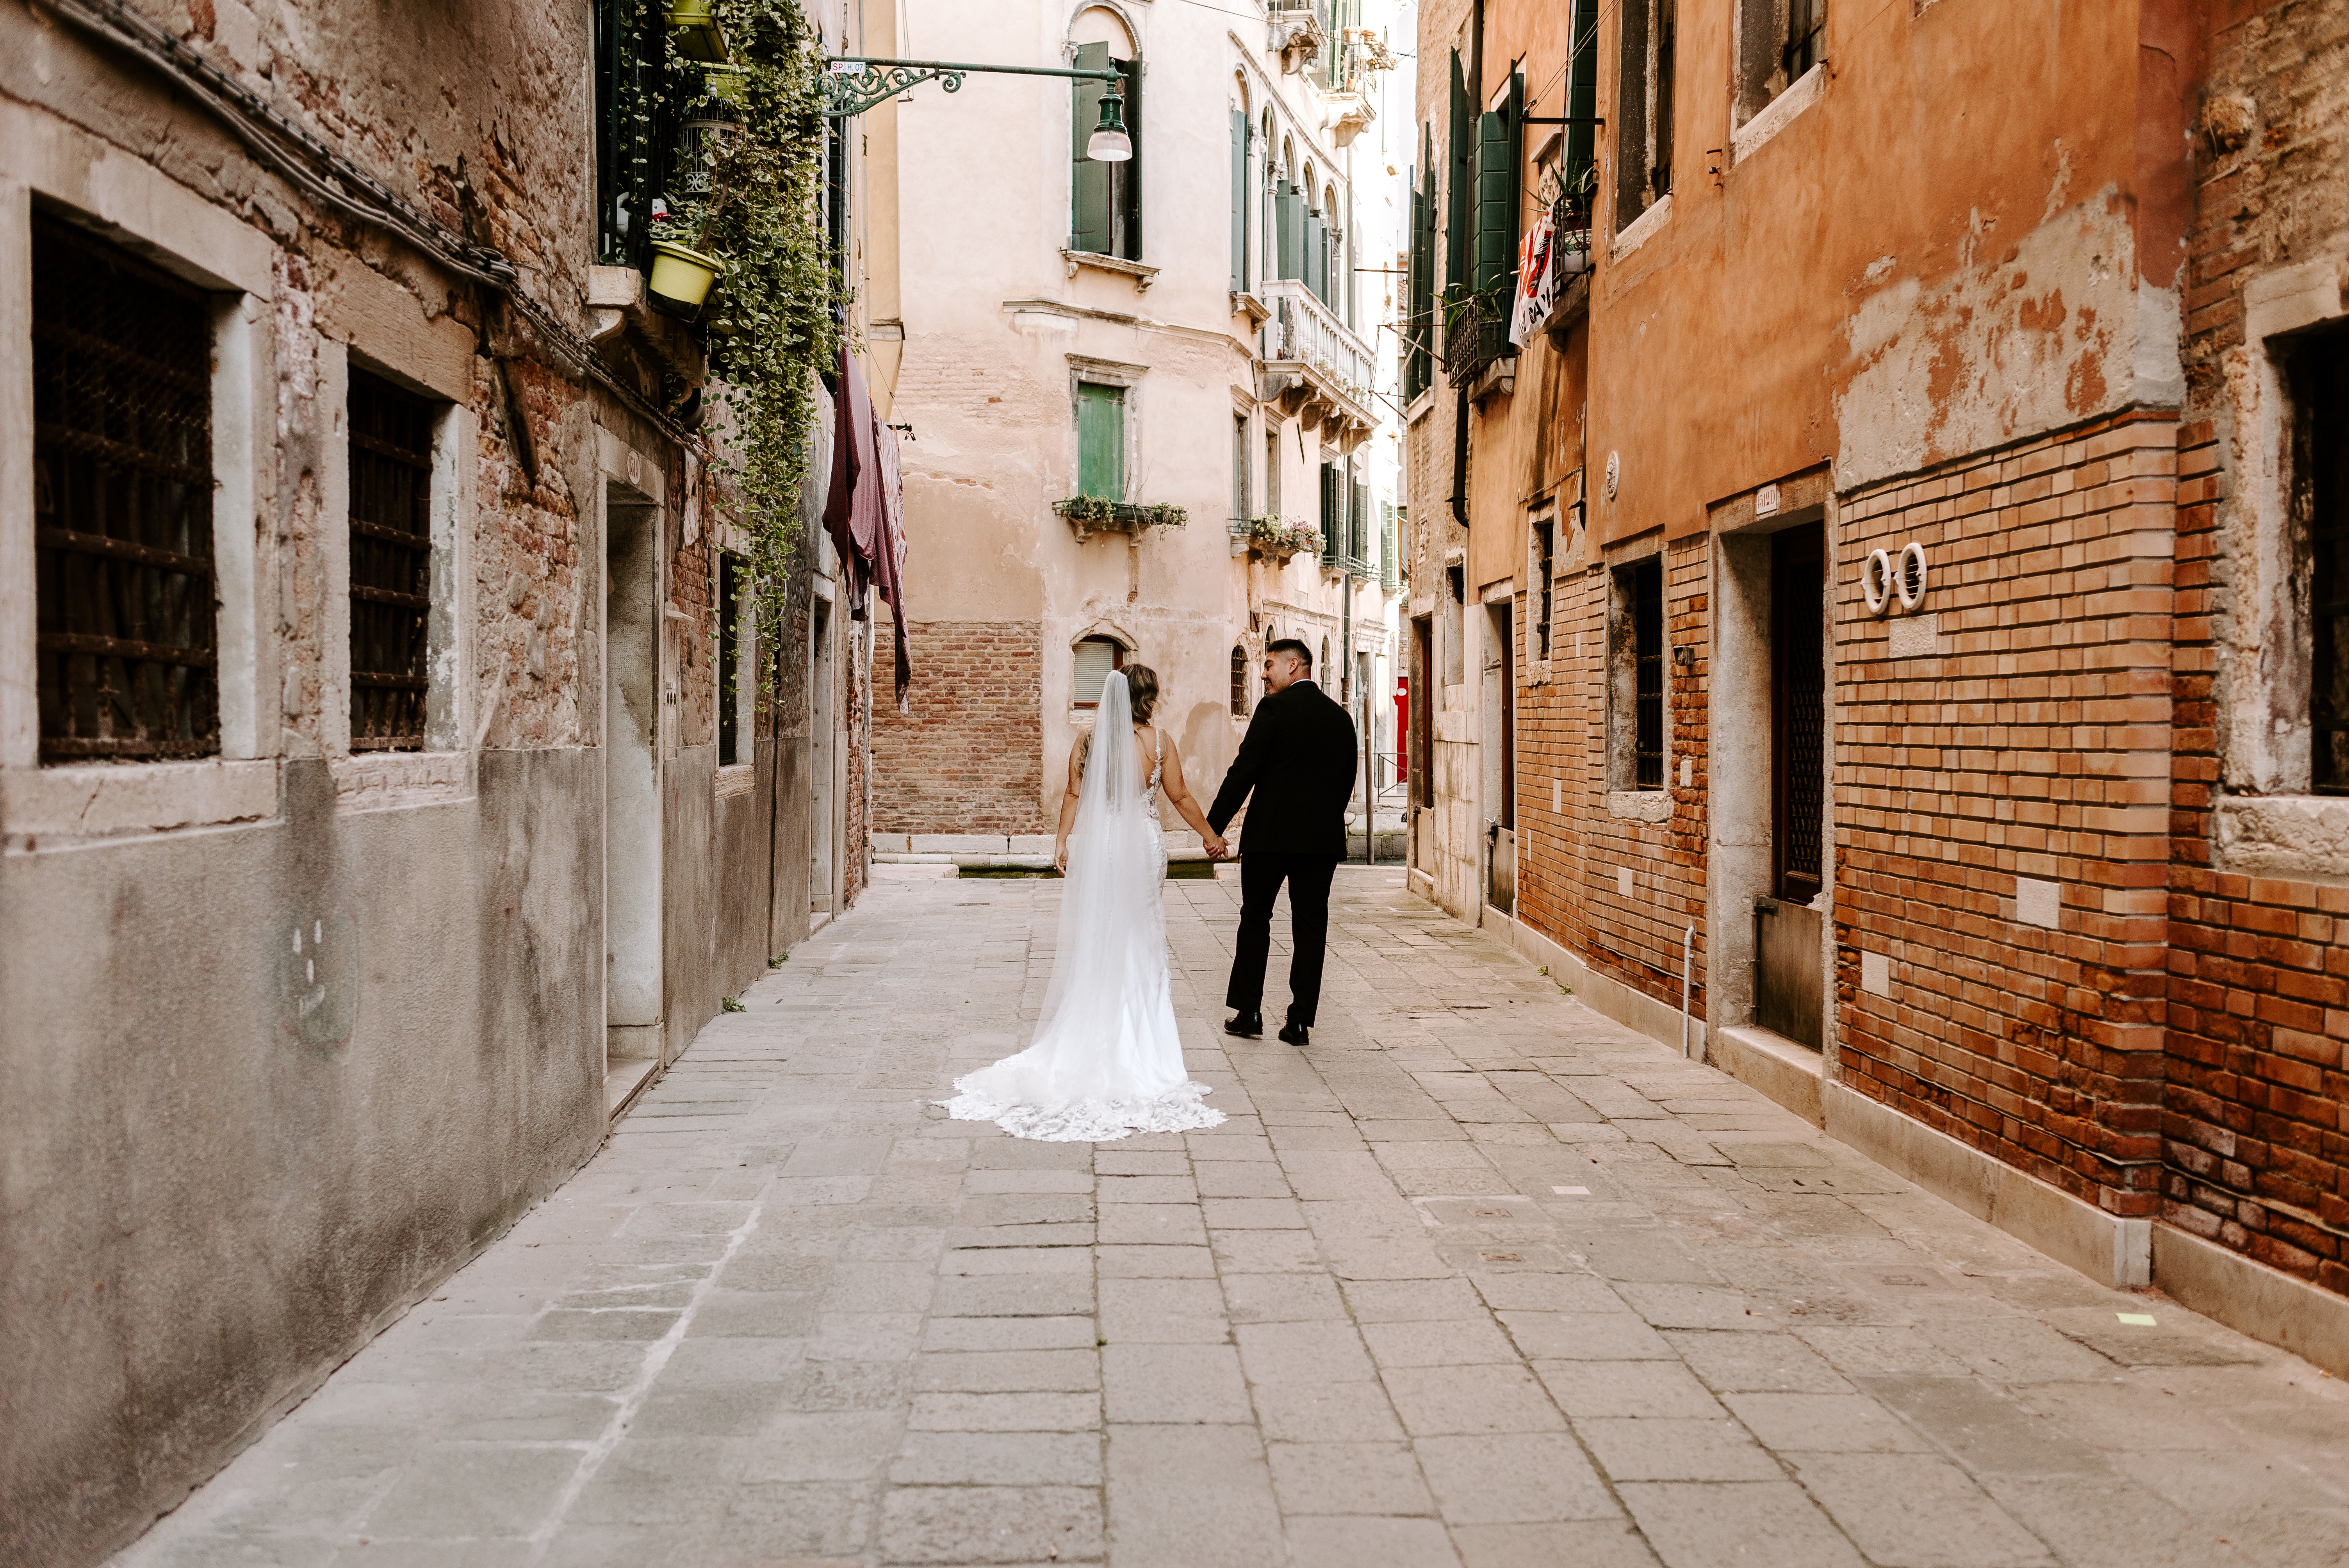 Reasons to Elope in Italy